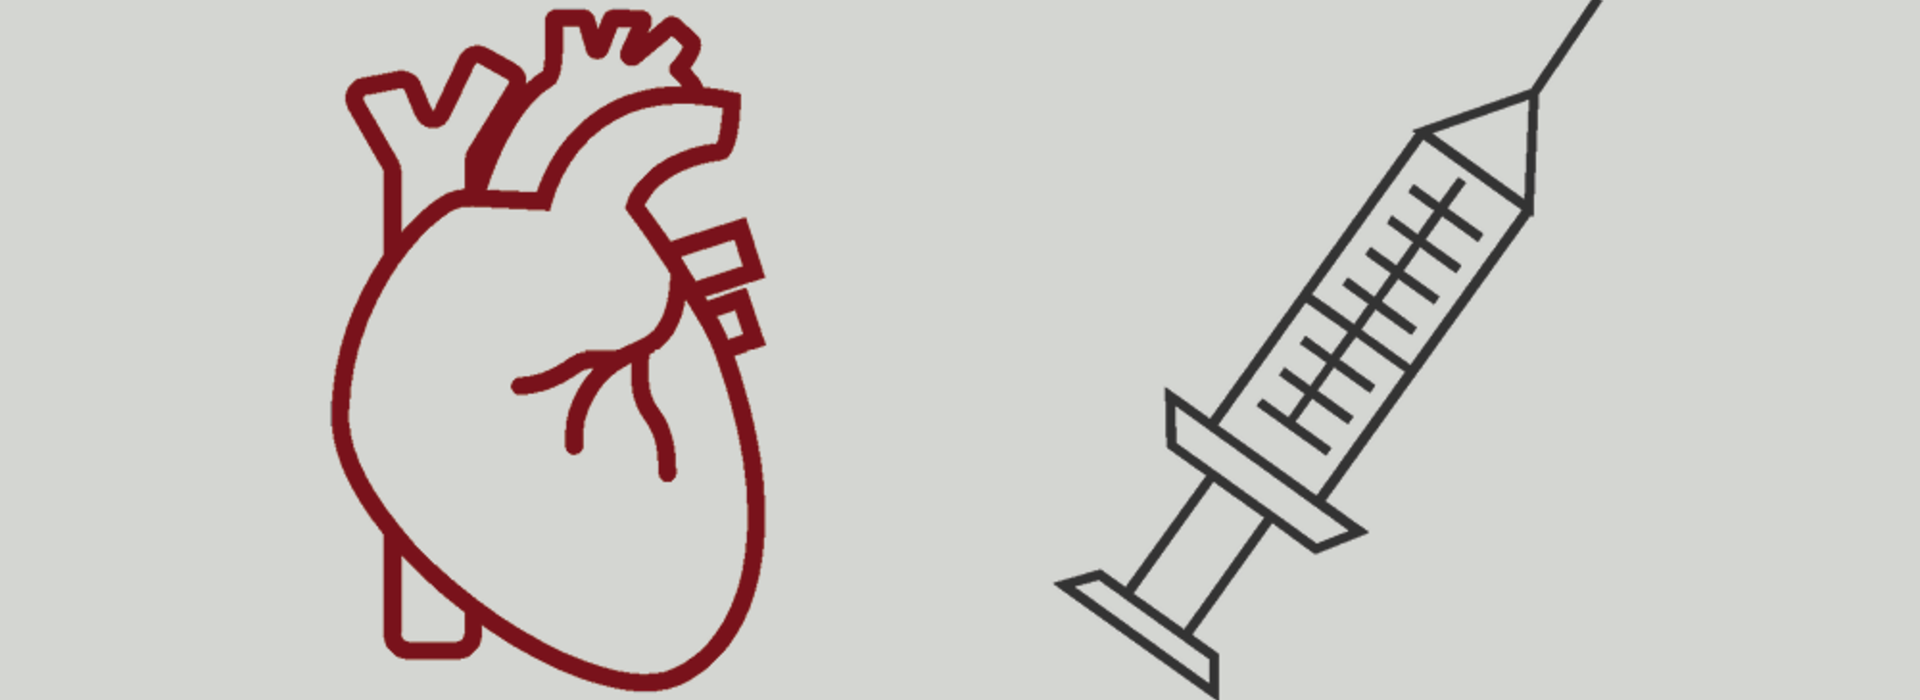 An illustration of a syringe and a heart.